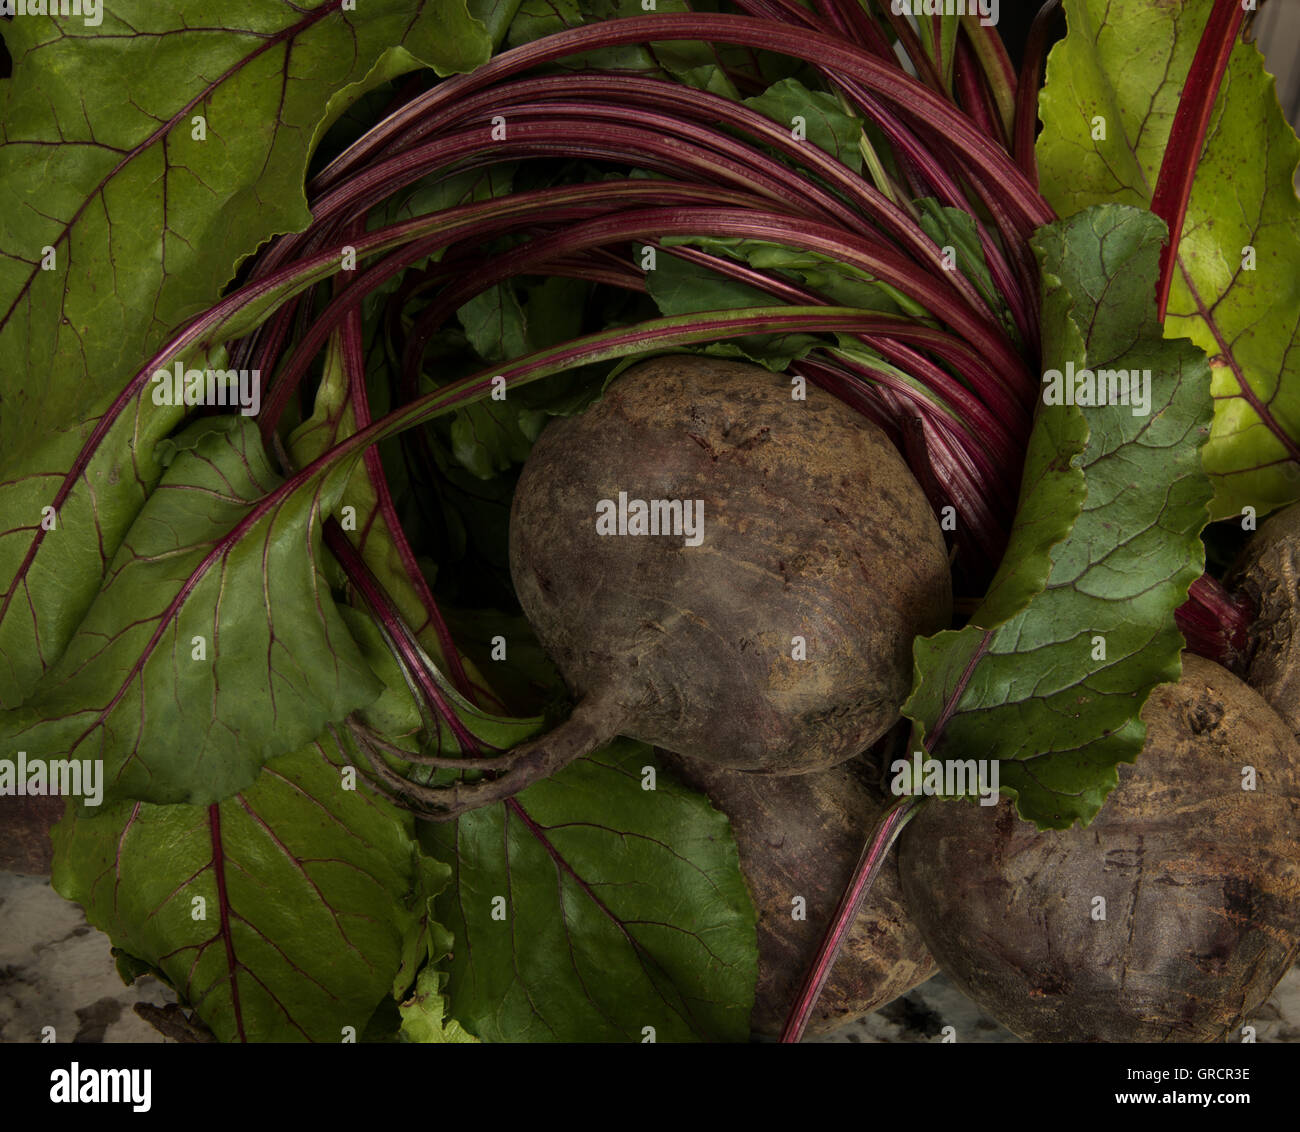 organic beets wrapped in their stems and leaves. Stock Photo